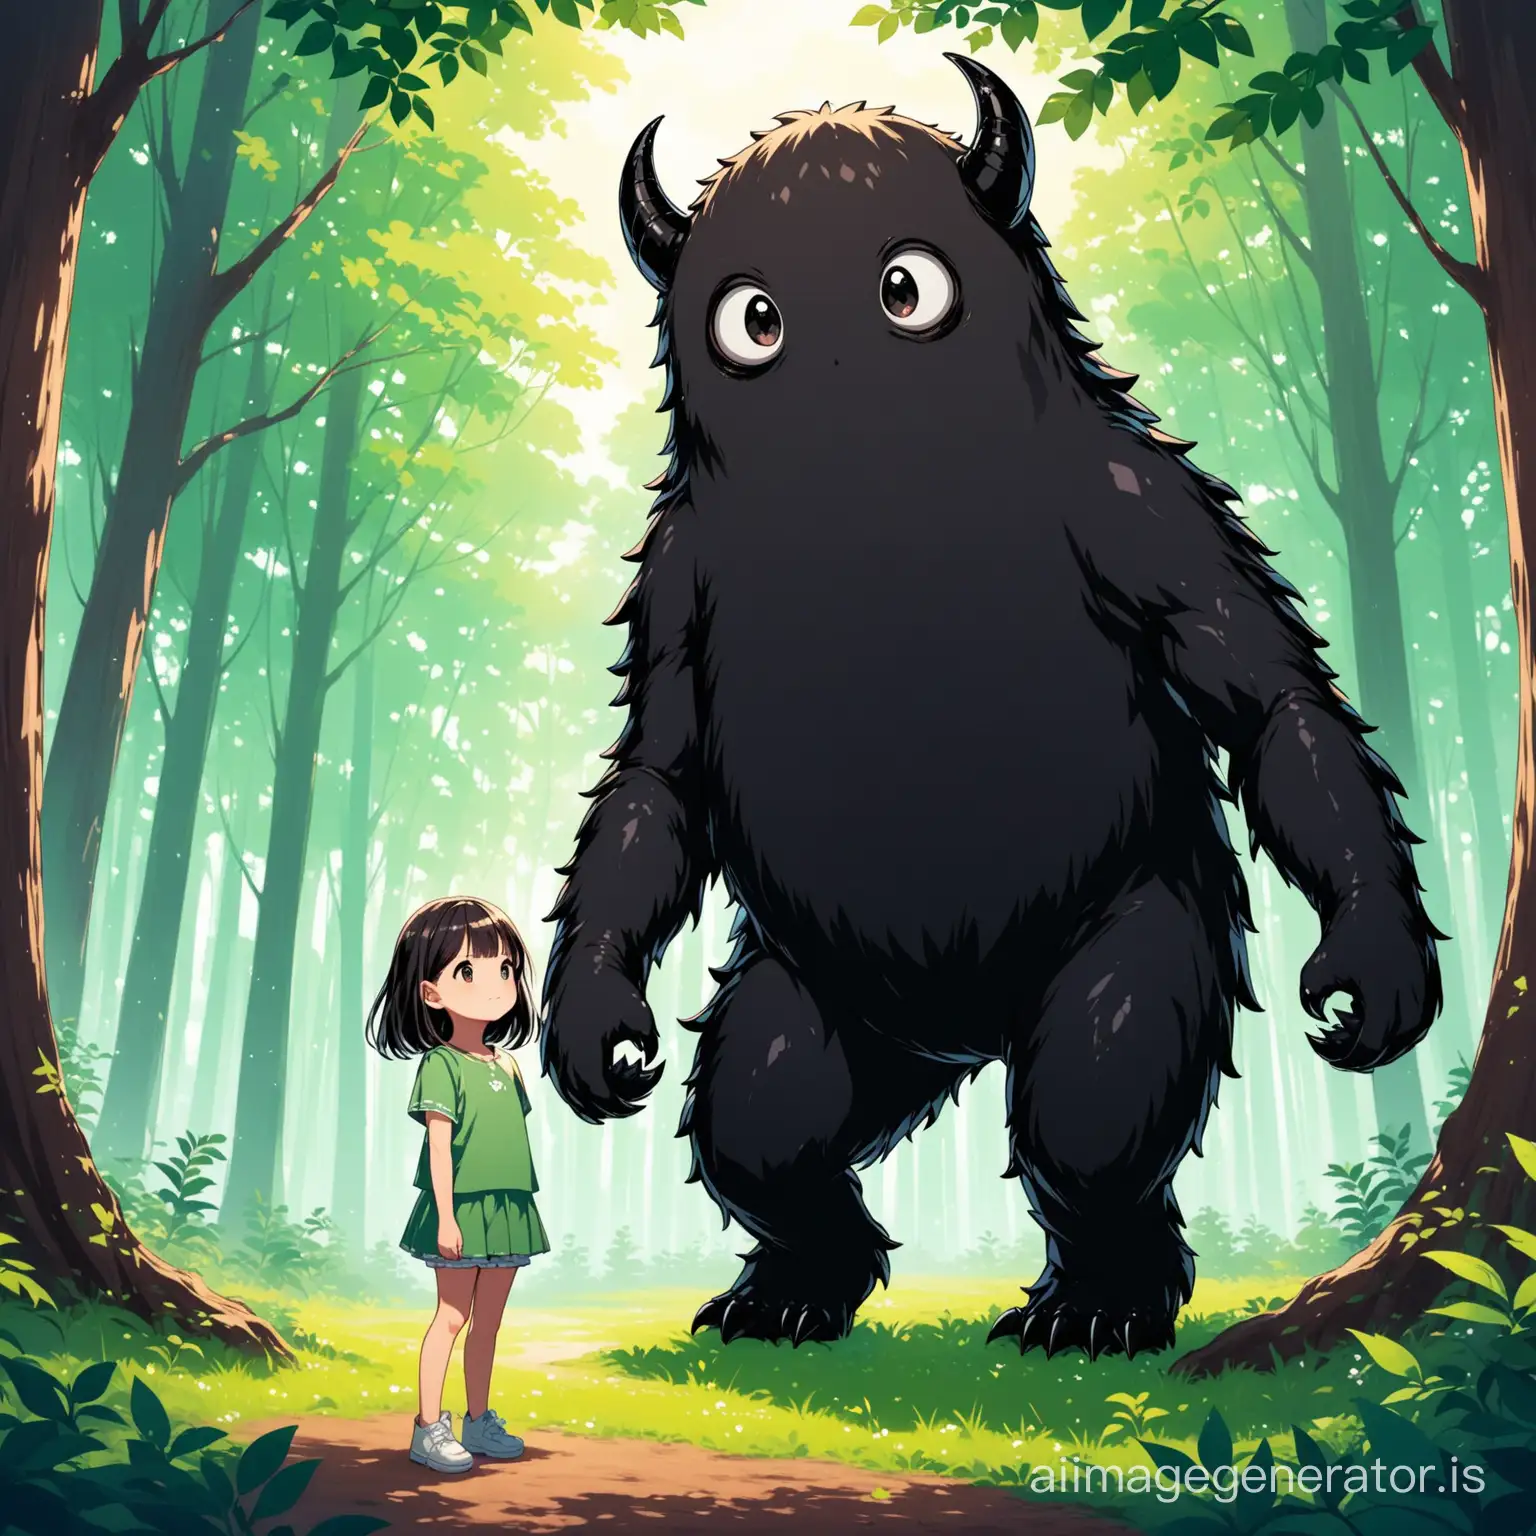 young girl
next to a small black monster with a forest background
